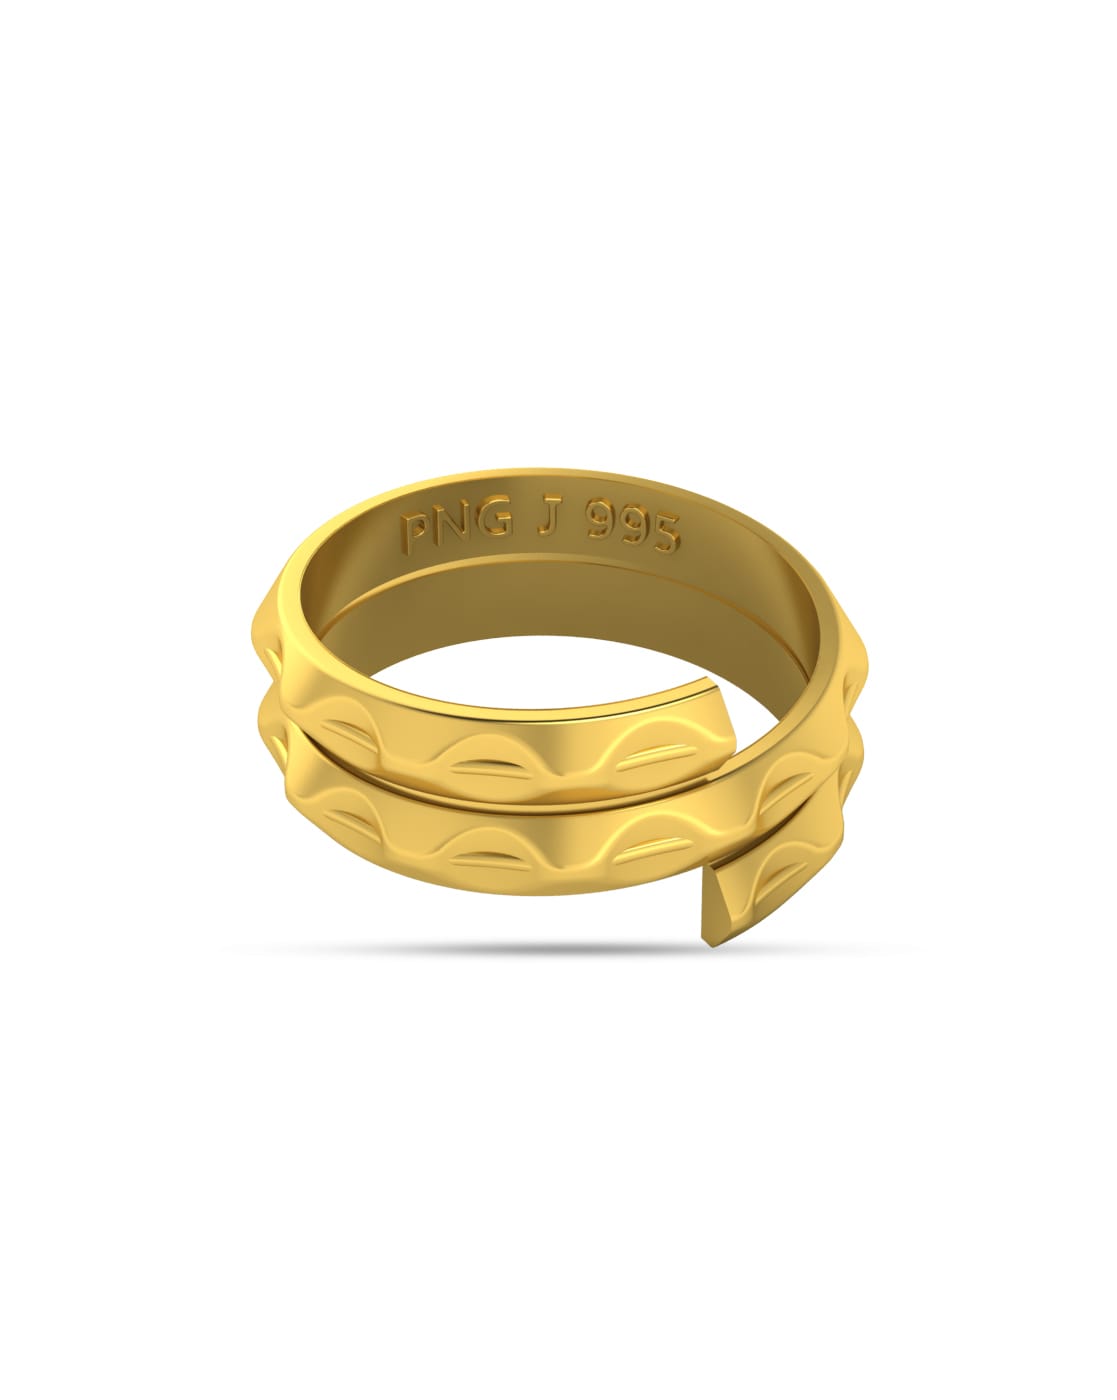 Latest Light 22k Gold Ring Designs with Weight and Price | Gold ring  designs, Couple ring design, Ring designs